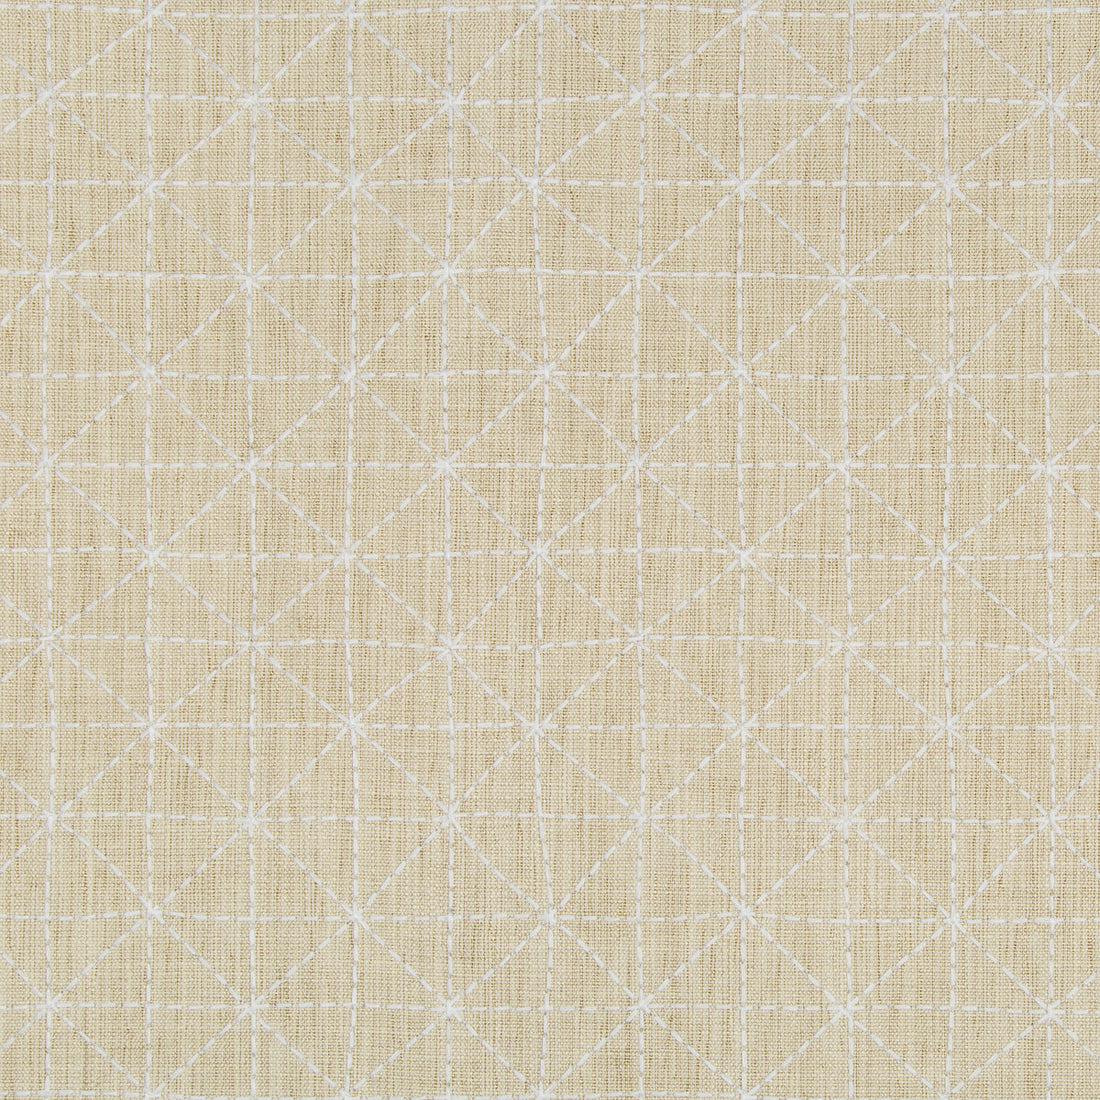 Appointed fabric in papyrus color - pattern 35380.116.0 - by Kravet Design in the Nate Berkus Well-Traveled collection